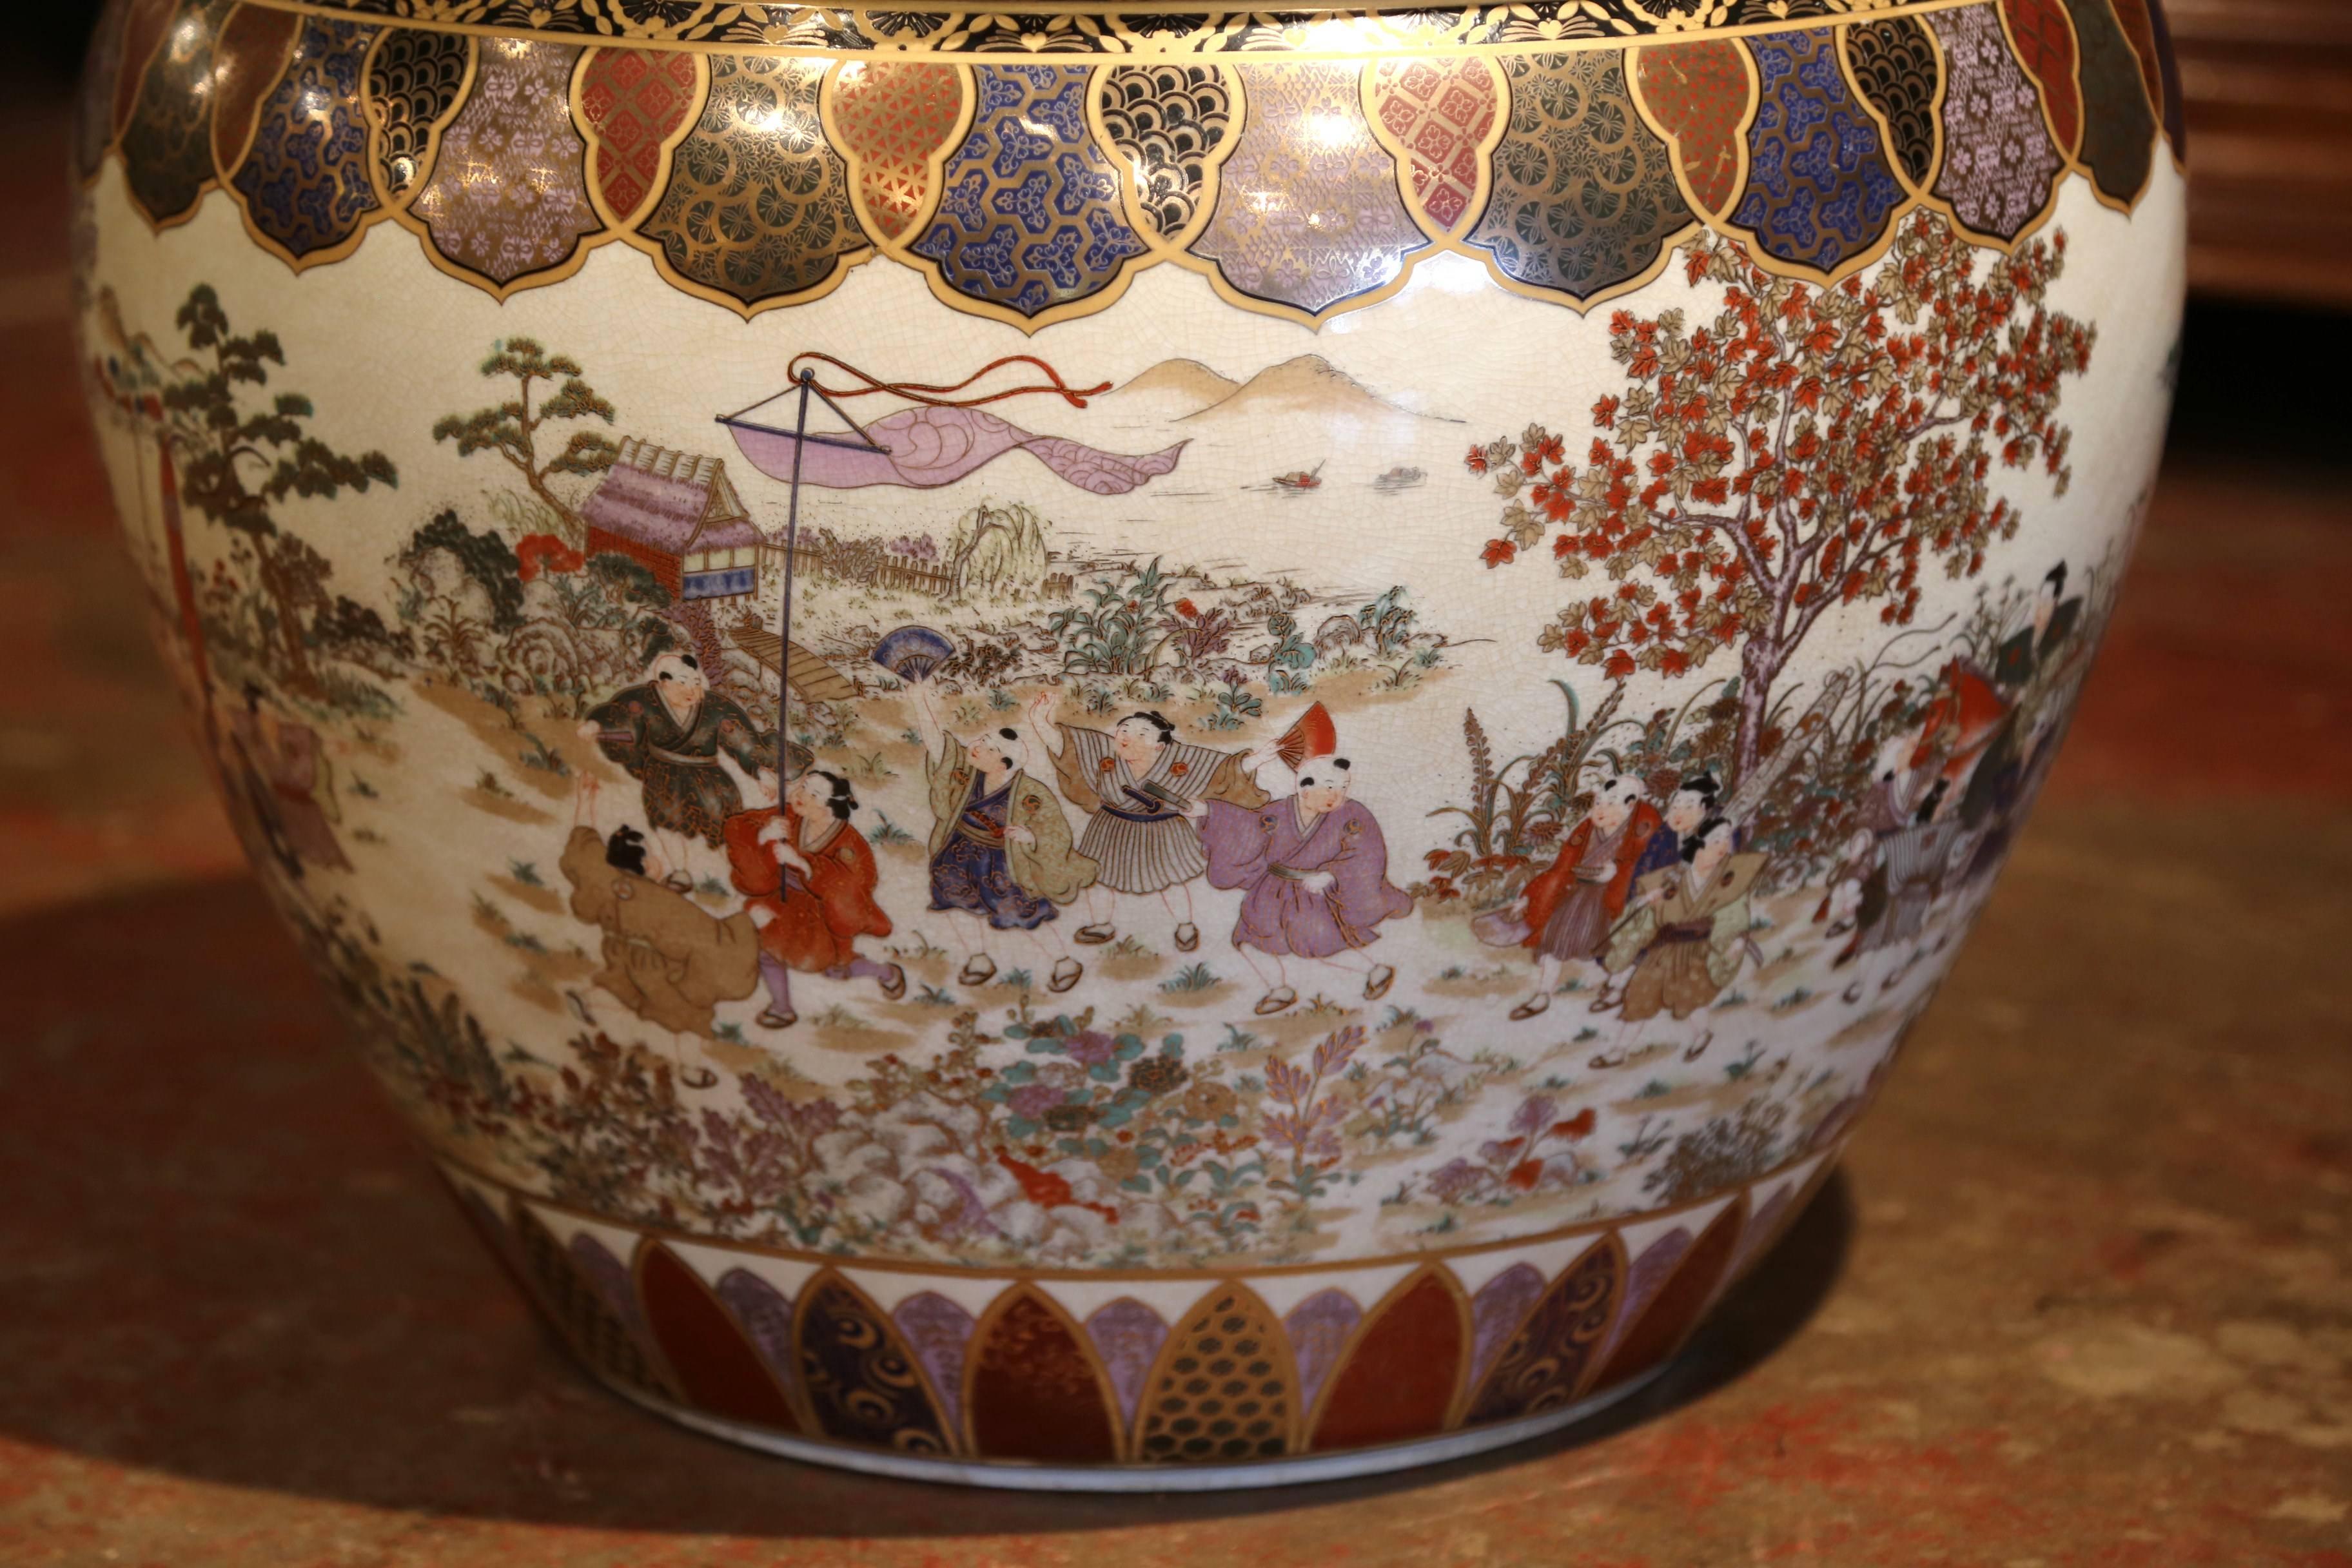 Large Porcelain Chinese Fishbowl Planter with Classic Oriental Decorations 1